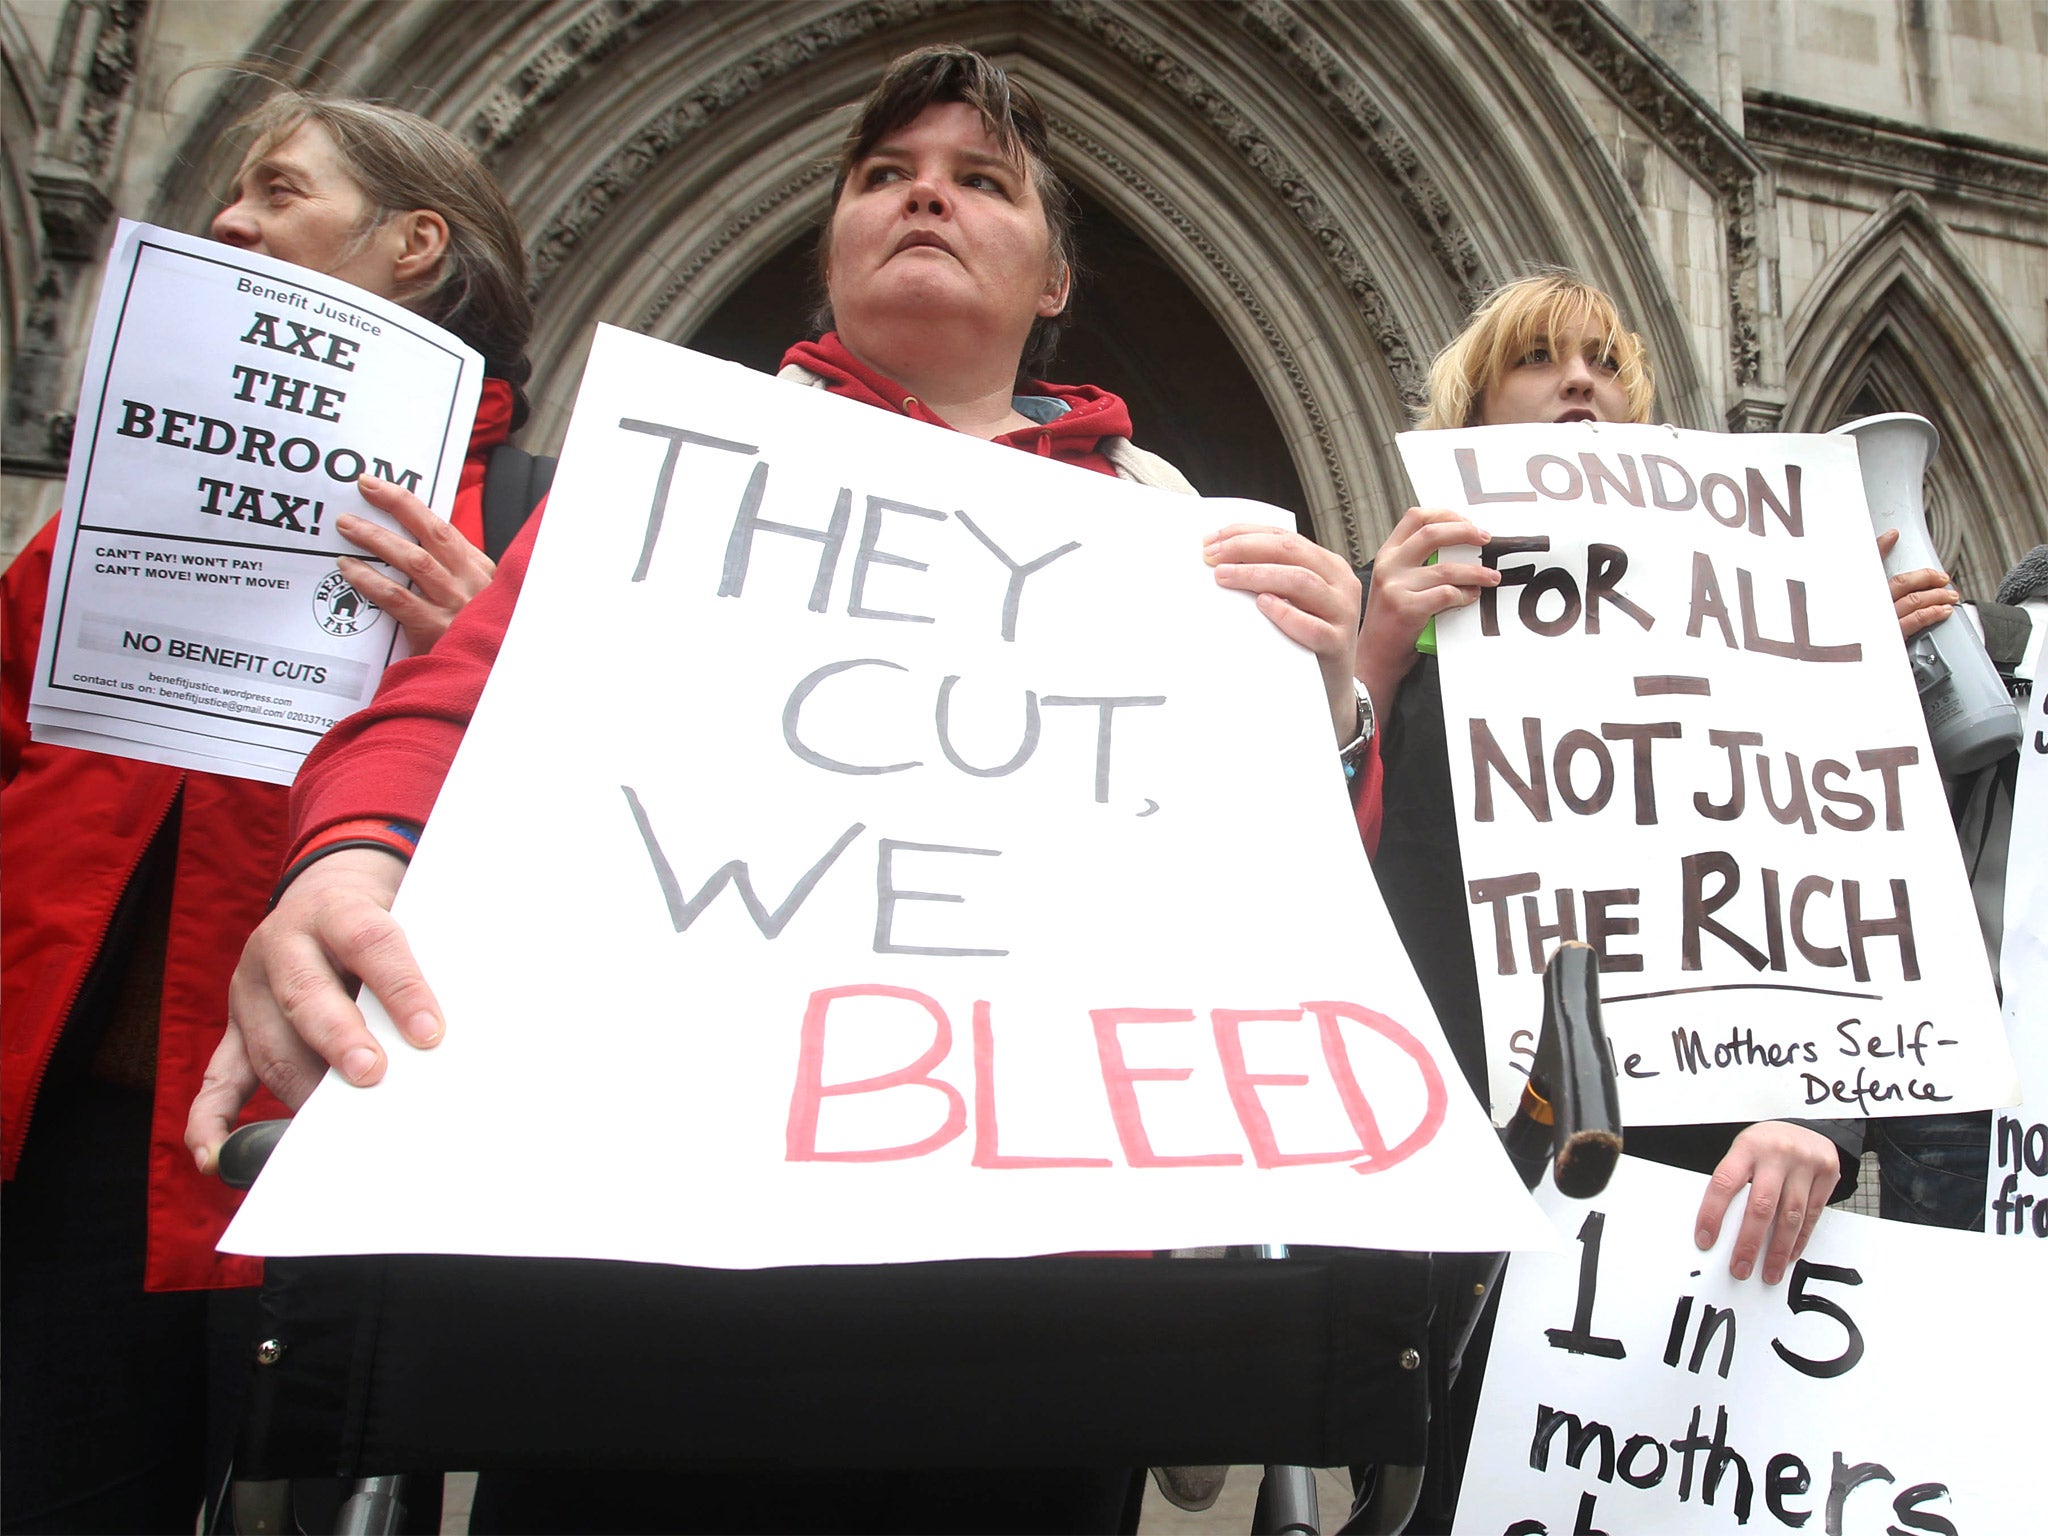 Protesters against the bedroom tax gather outside the Royal Courts of Justice in London